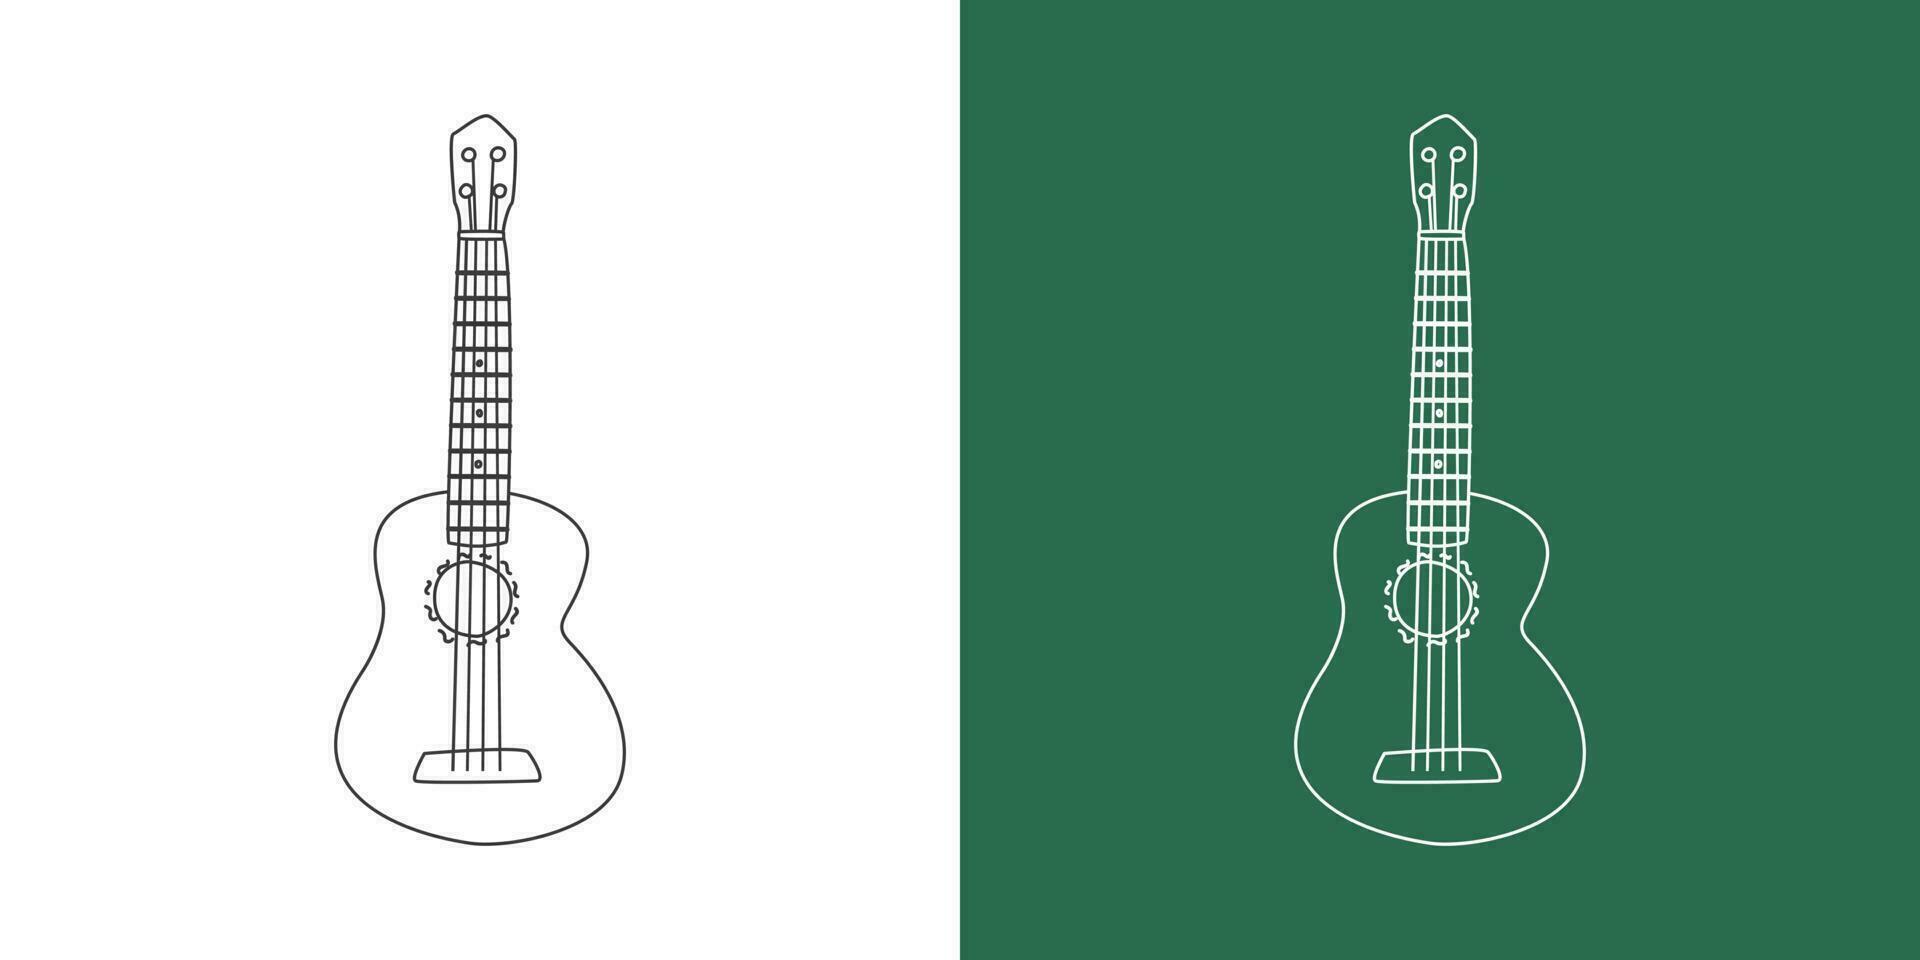 Ukulele line drawing cartoon style. String instrument ukulele clipart drawing in linear style isolated on white and chalkboard background. Musical instrument clipart concept, vector design